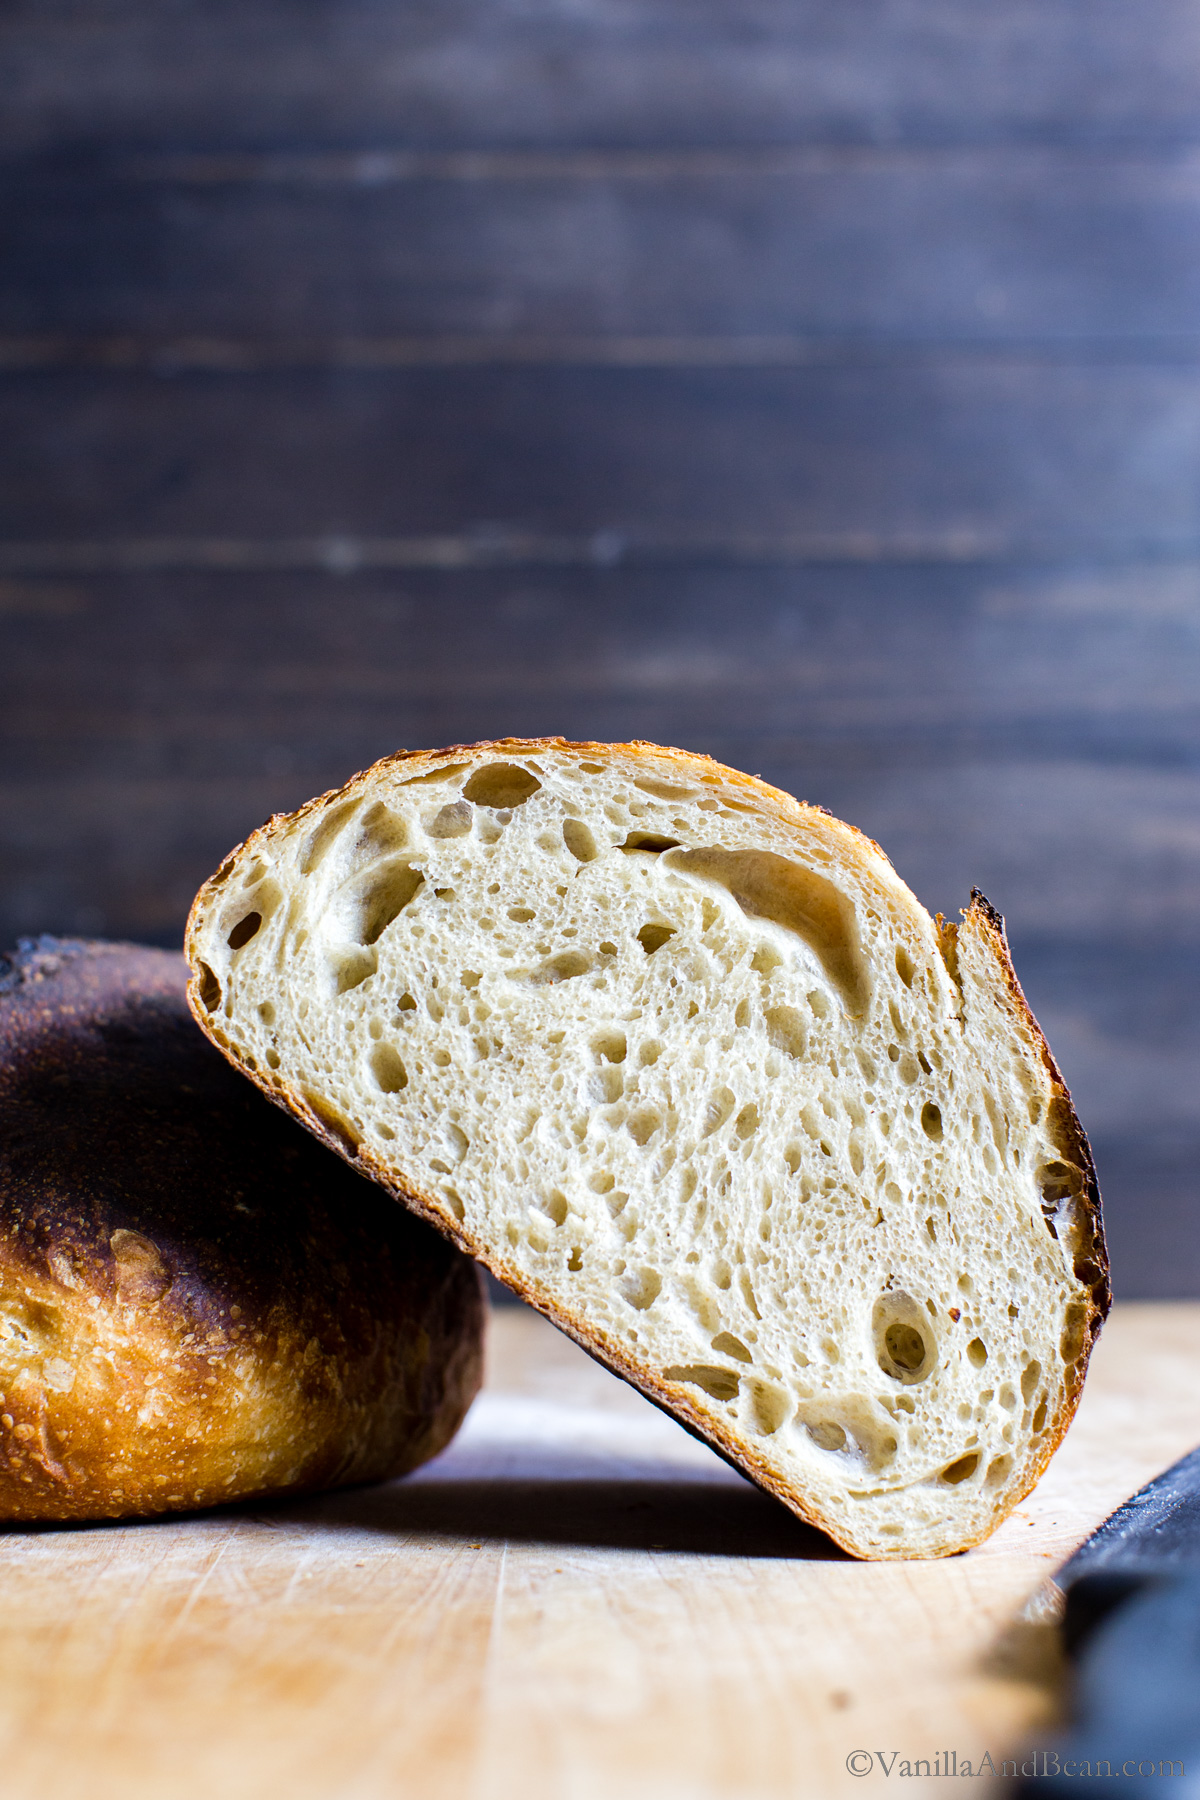 How to Make Fabulous Bread in Your Oven - The Prepared Pantry Blog